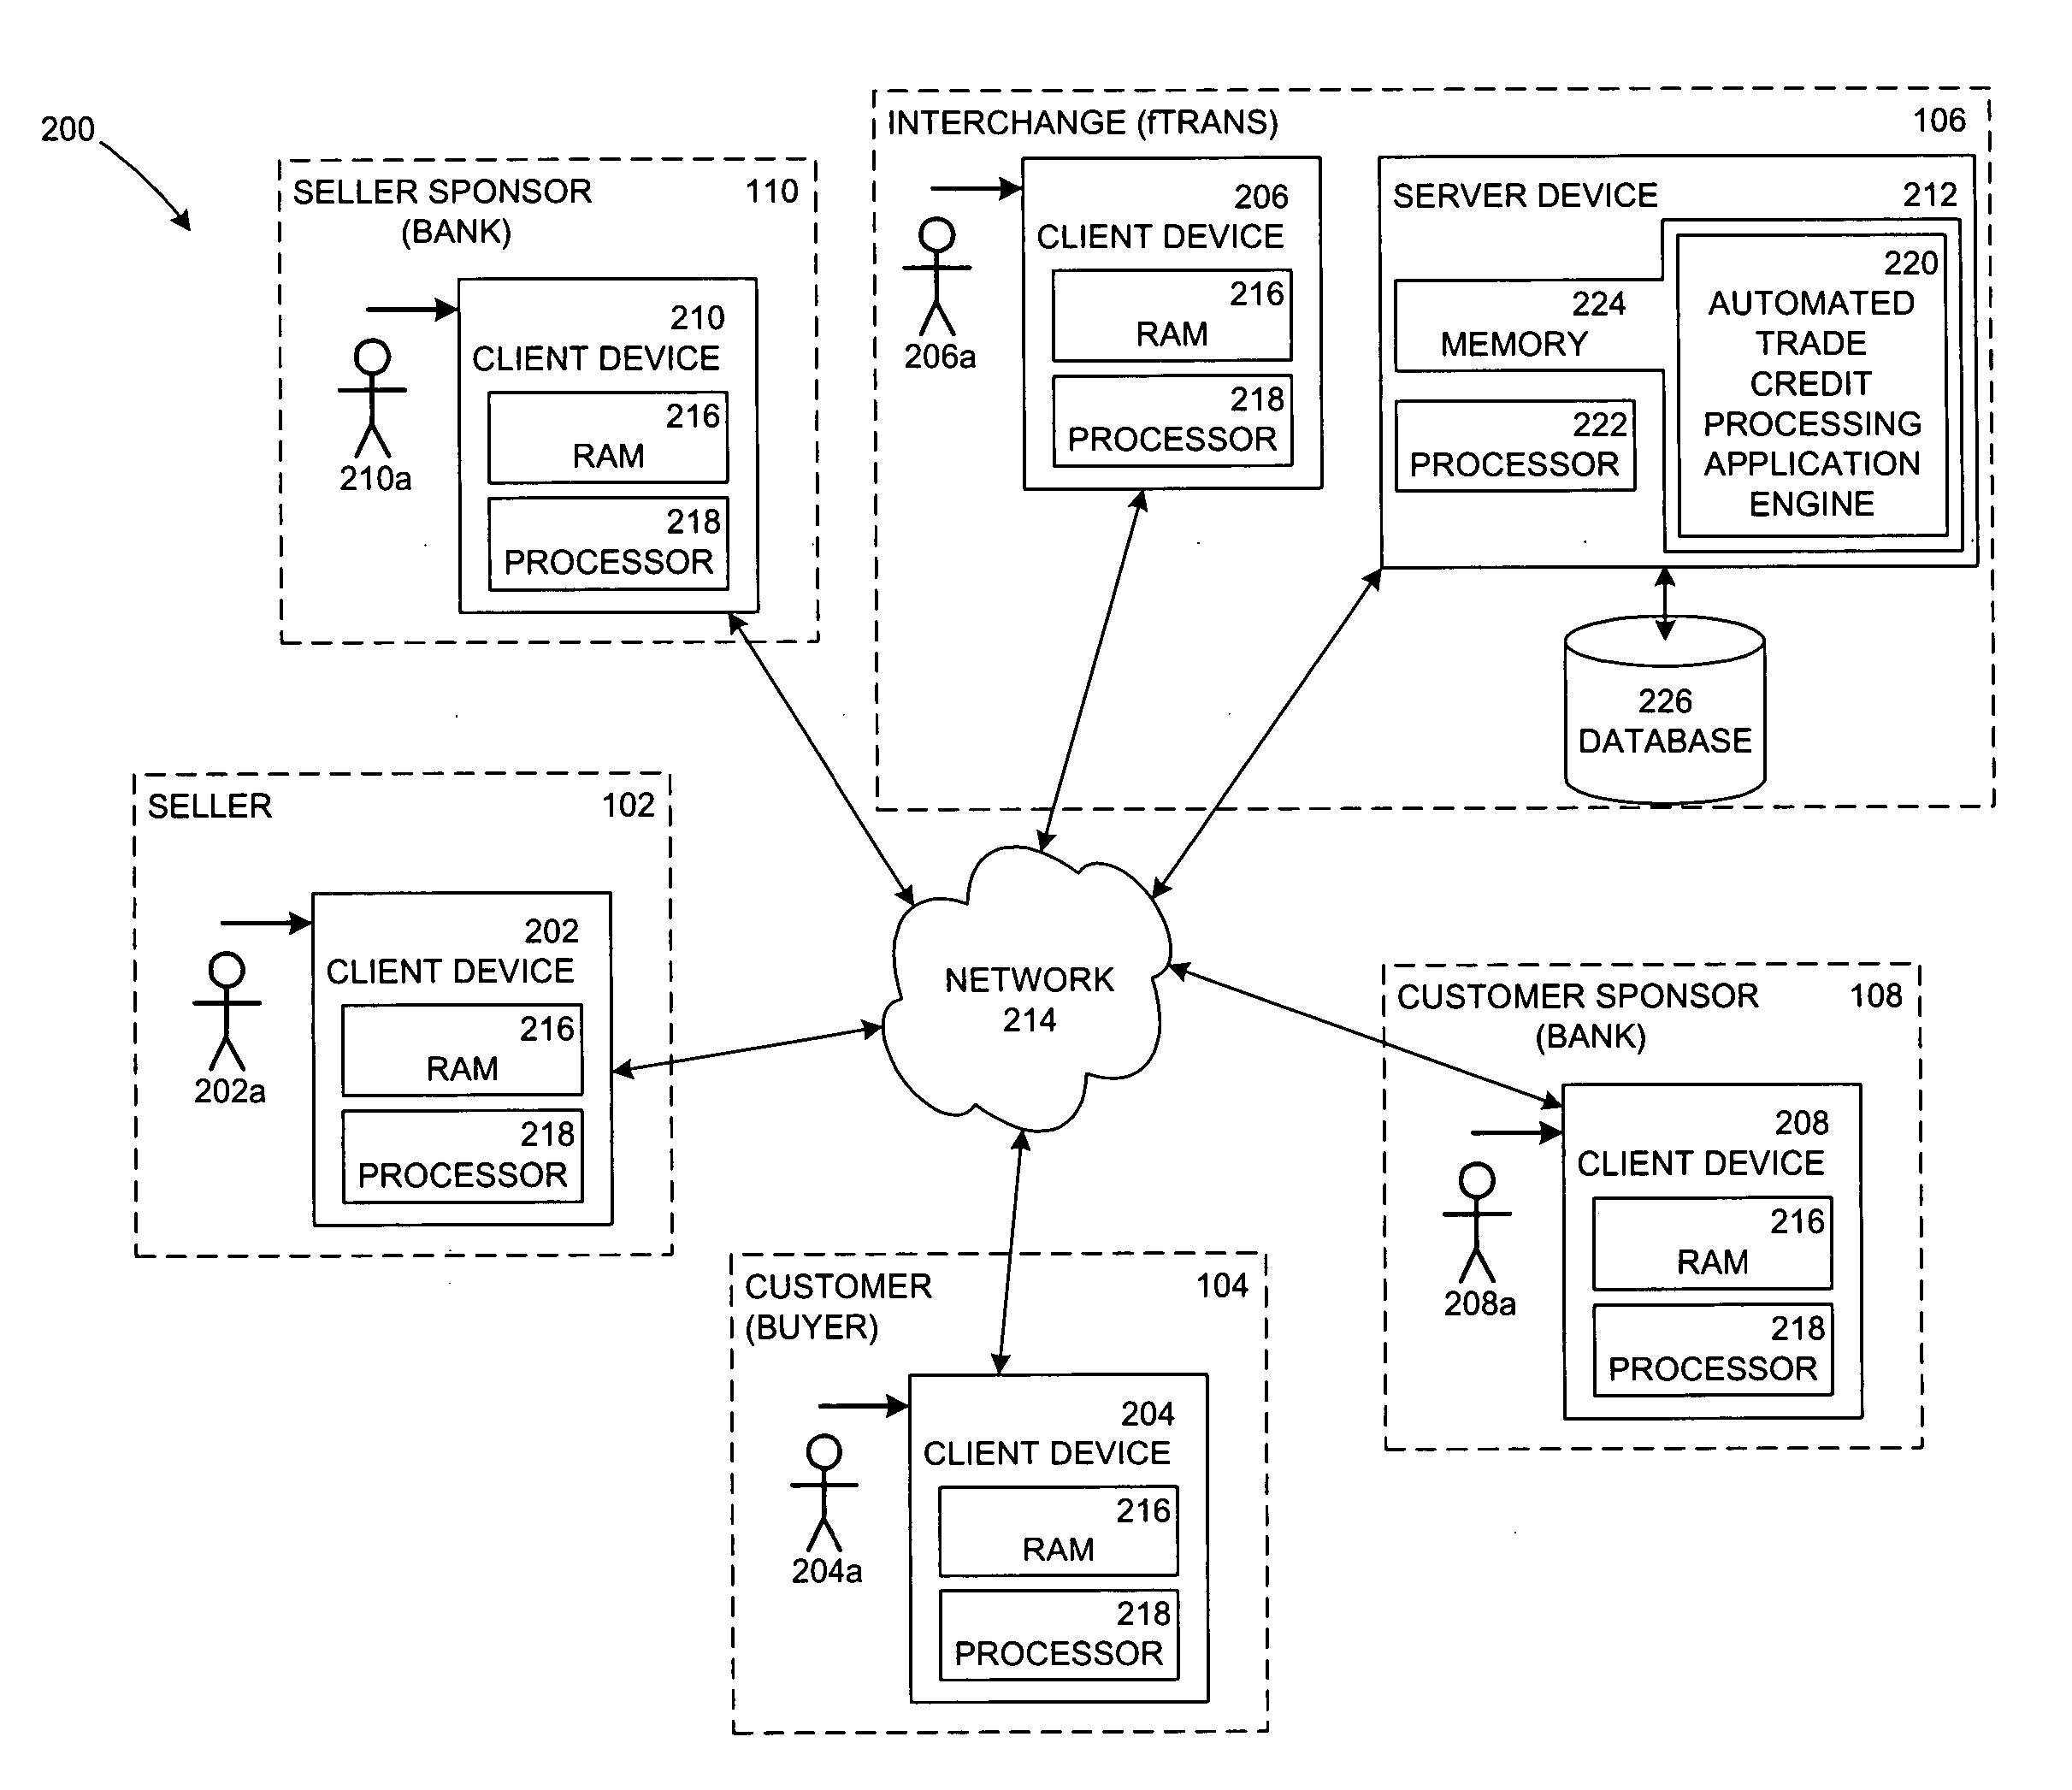 Systems and methods for automated processing, handling, and facilitating a trade credit transaction